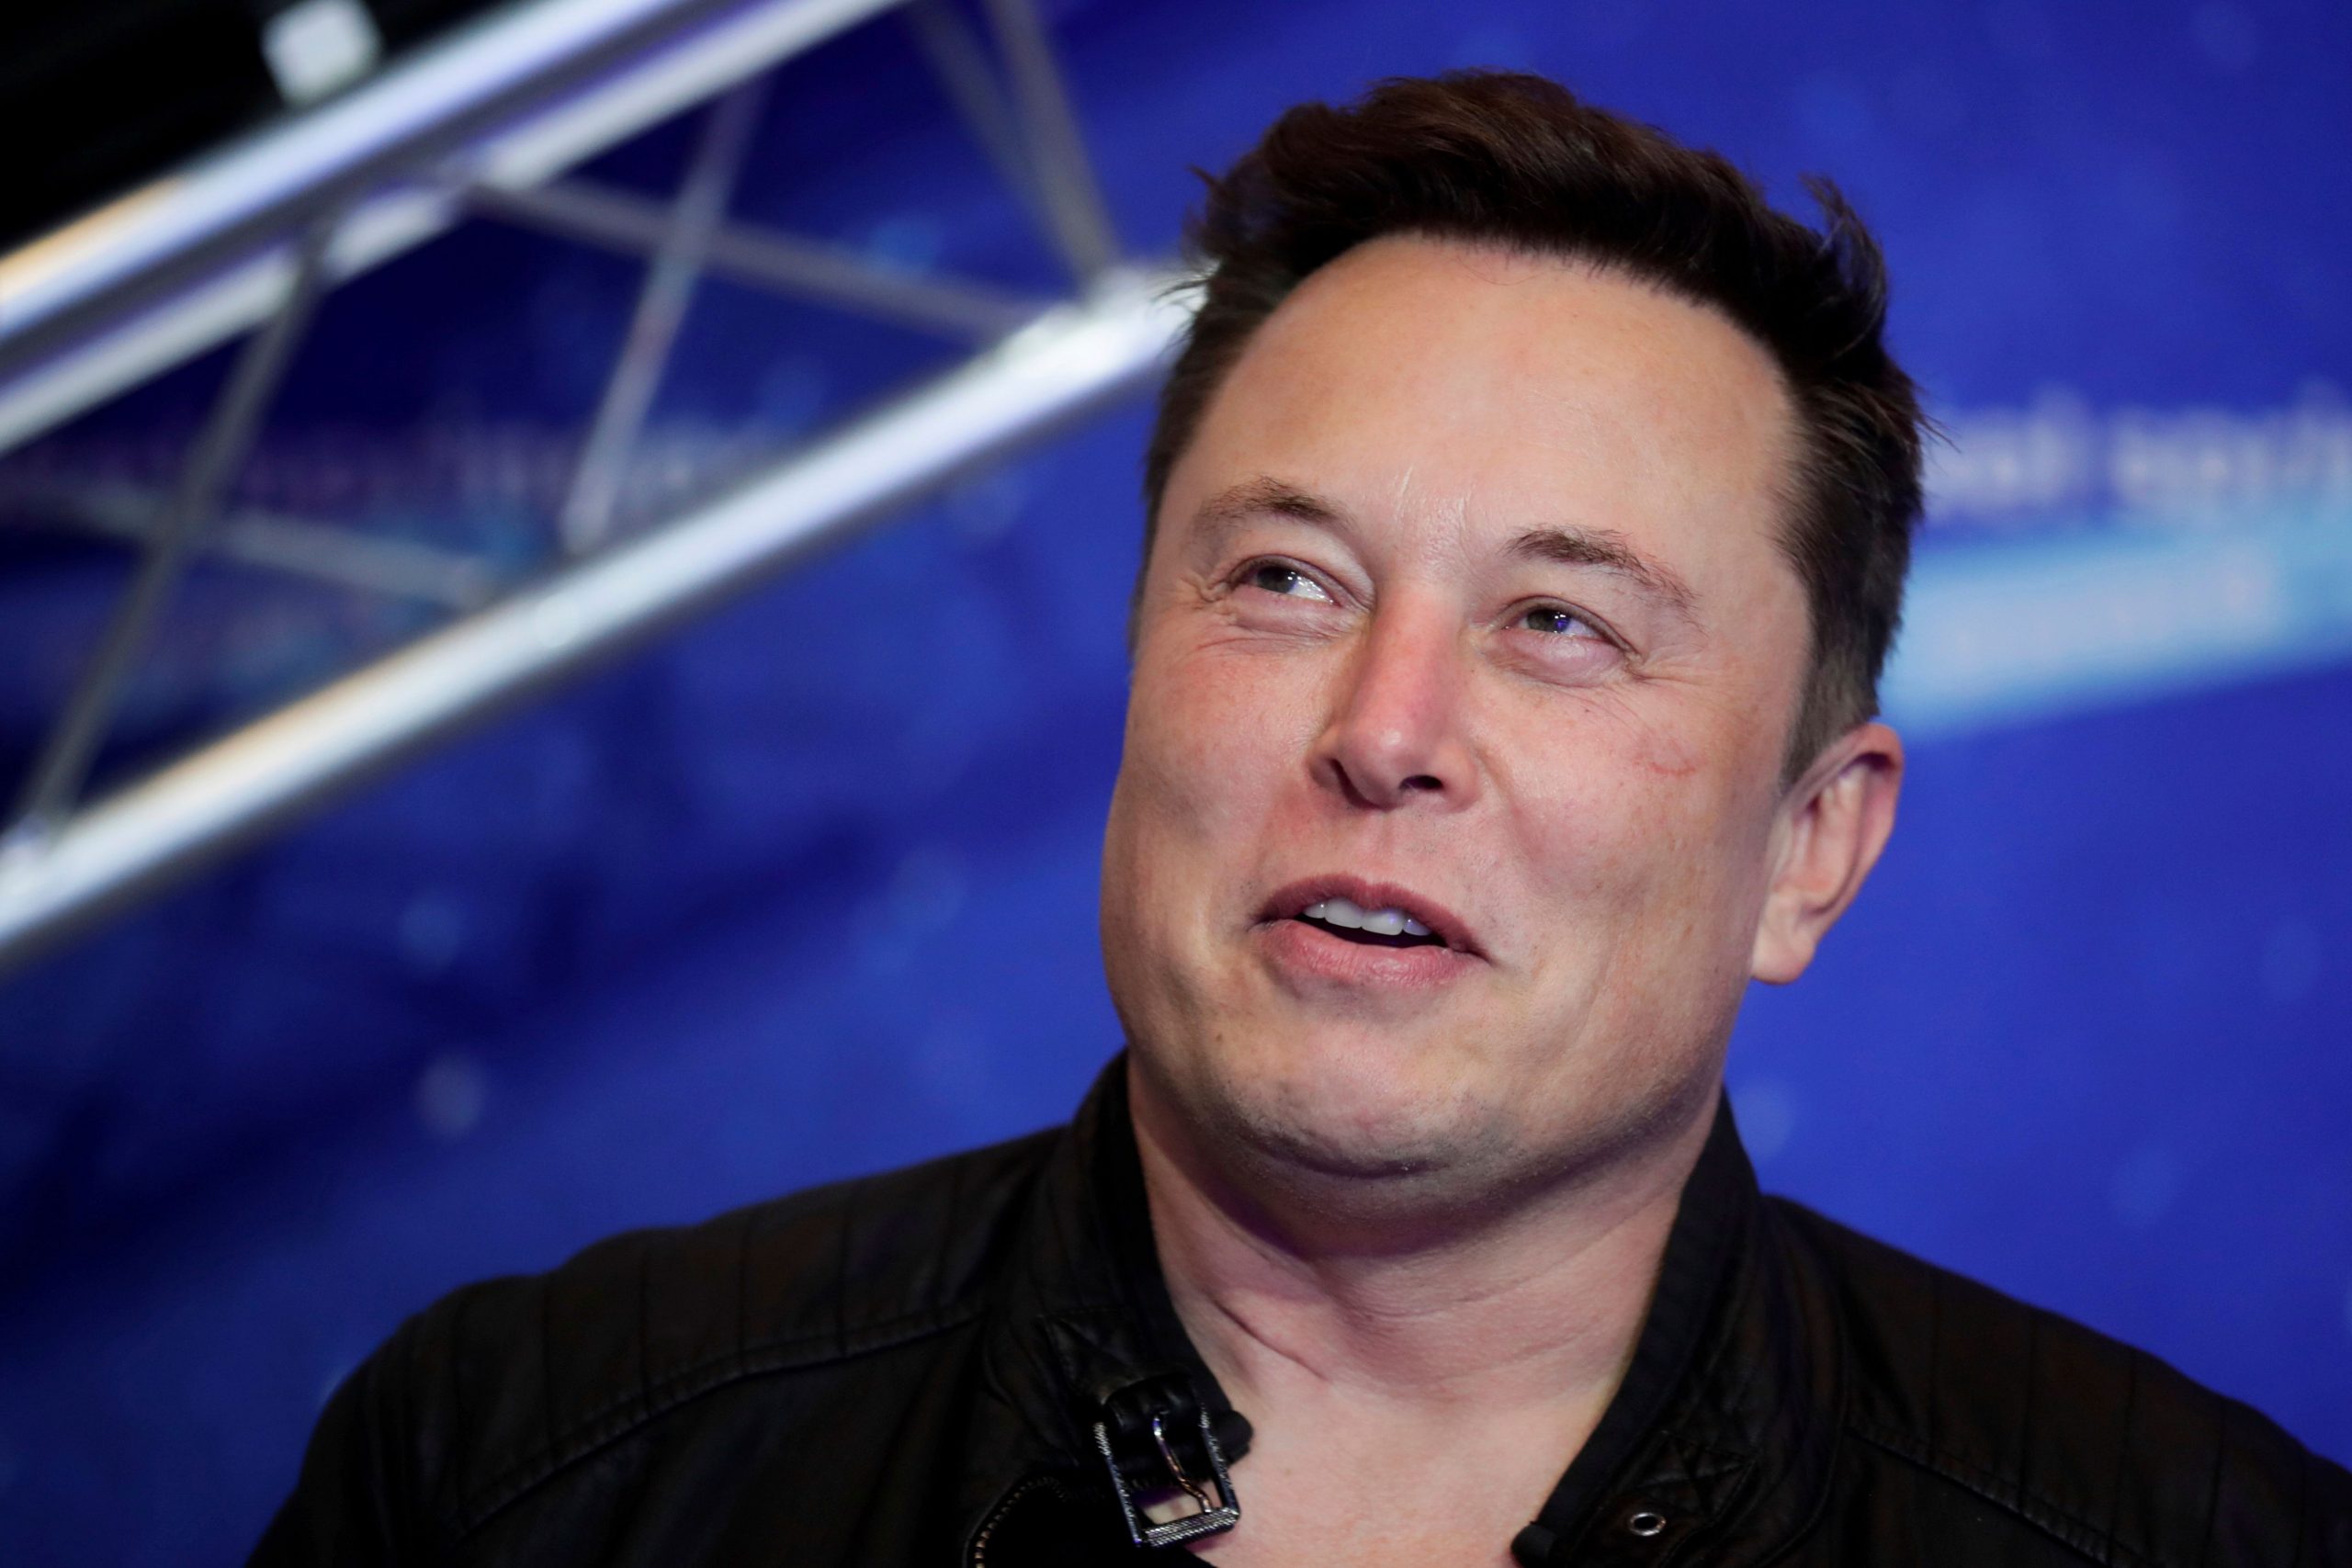 Why Elon Musk buying Twitter changes the internet